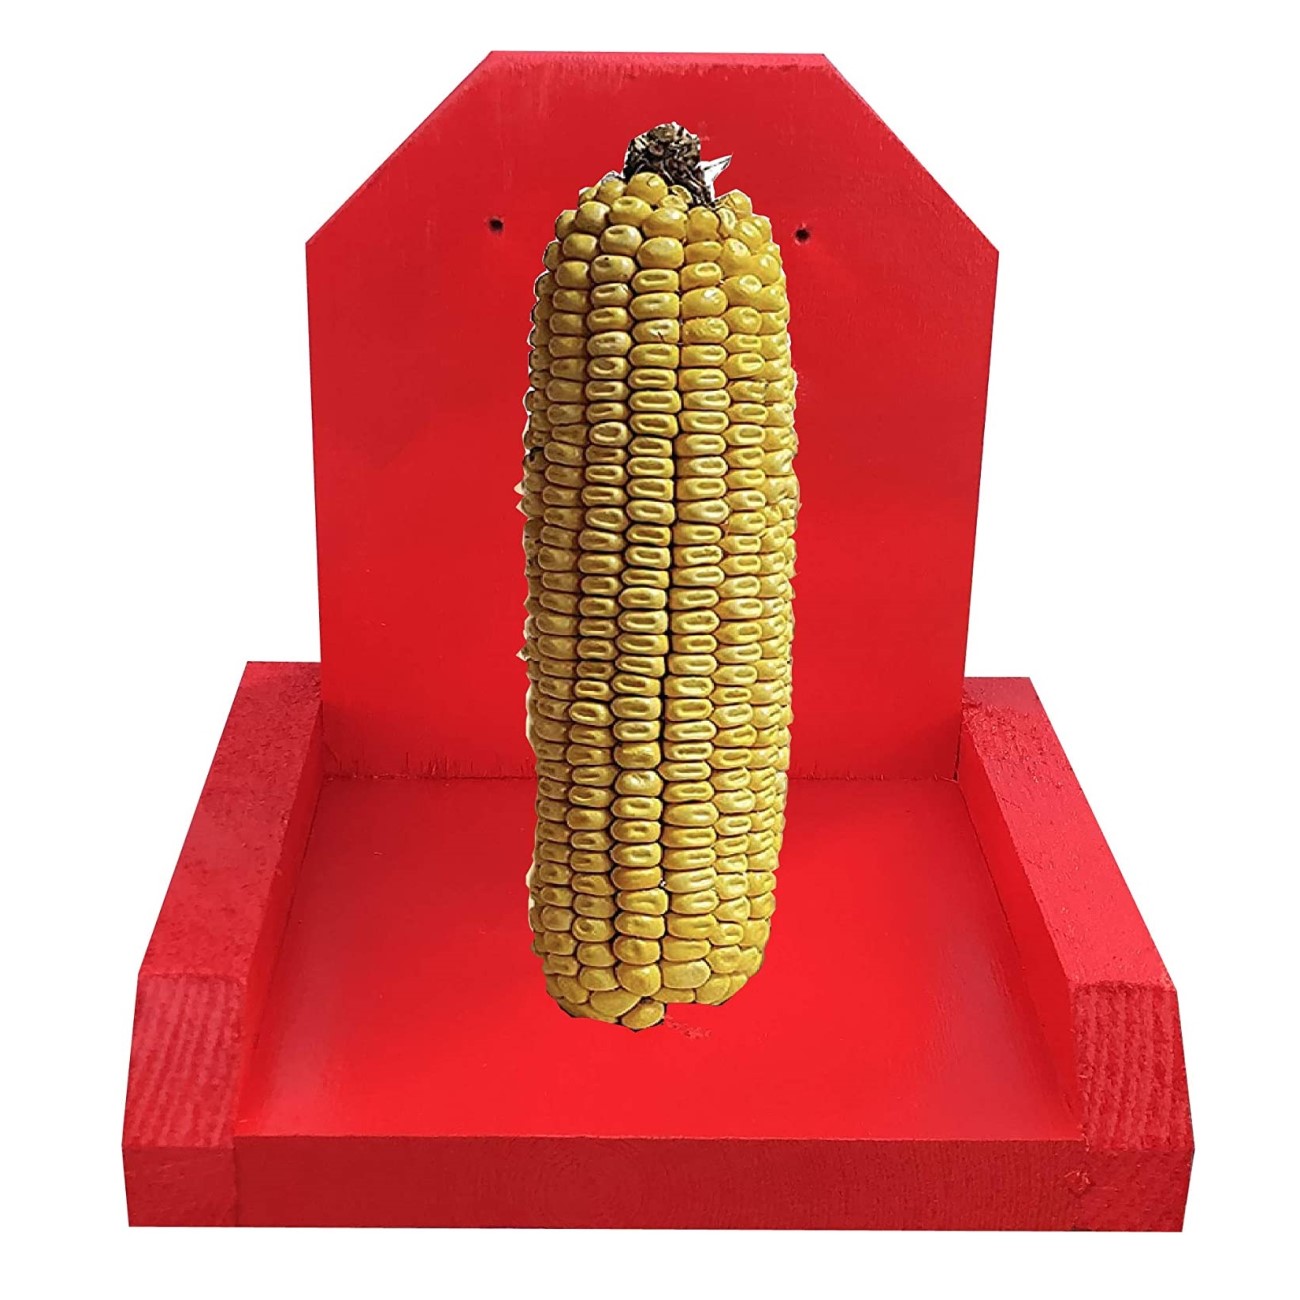 SquirrelSupply.com - Squirrel Feeder Platform – Red - Hand Made in USA – Uses Corn Cob for Fun Squirrel Entertainment